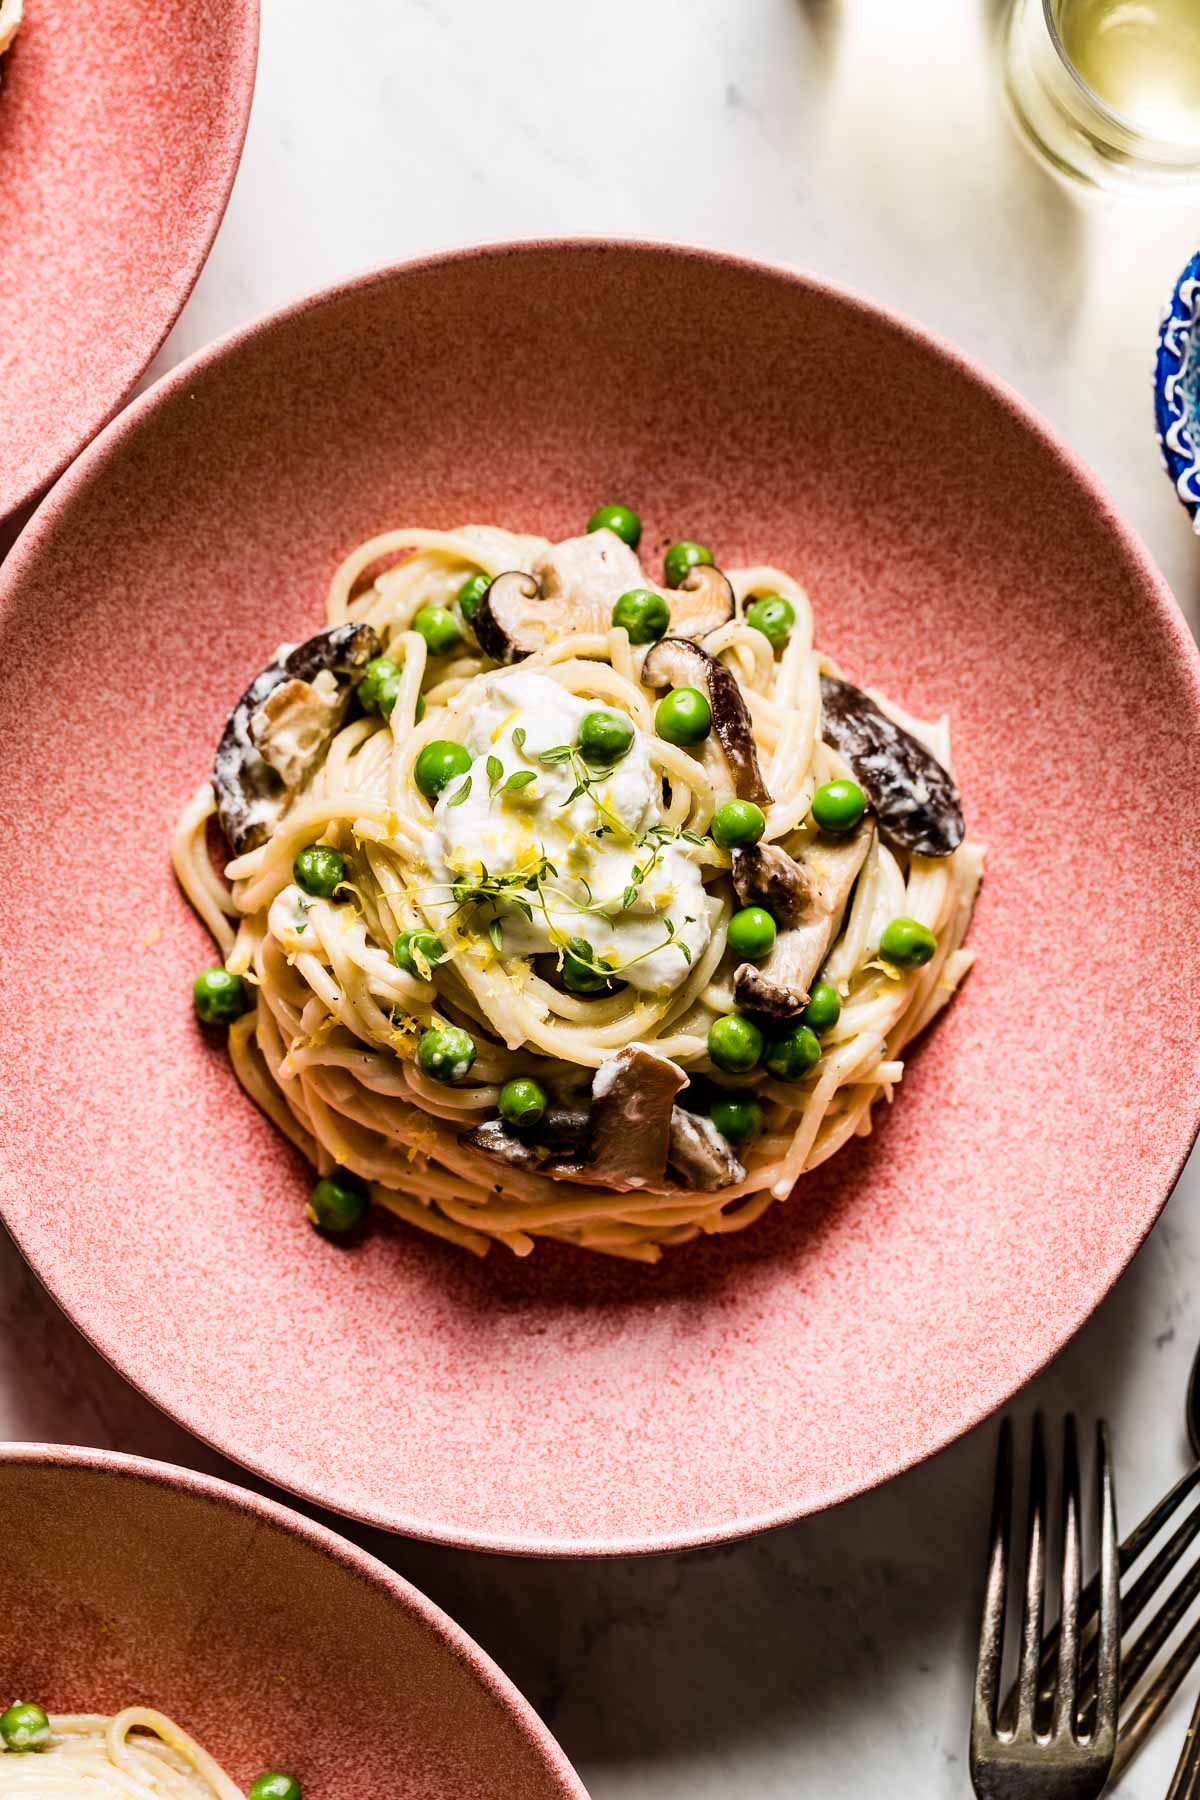 Pasta with mushrooms and peas in a bowl garnished with thyme.